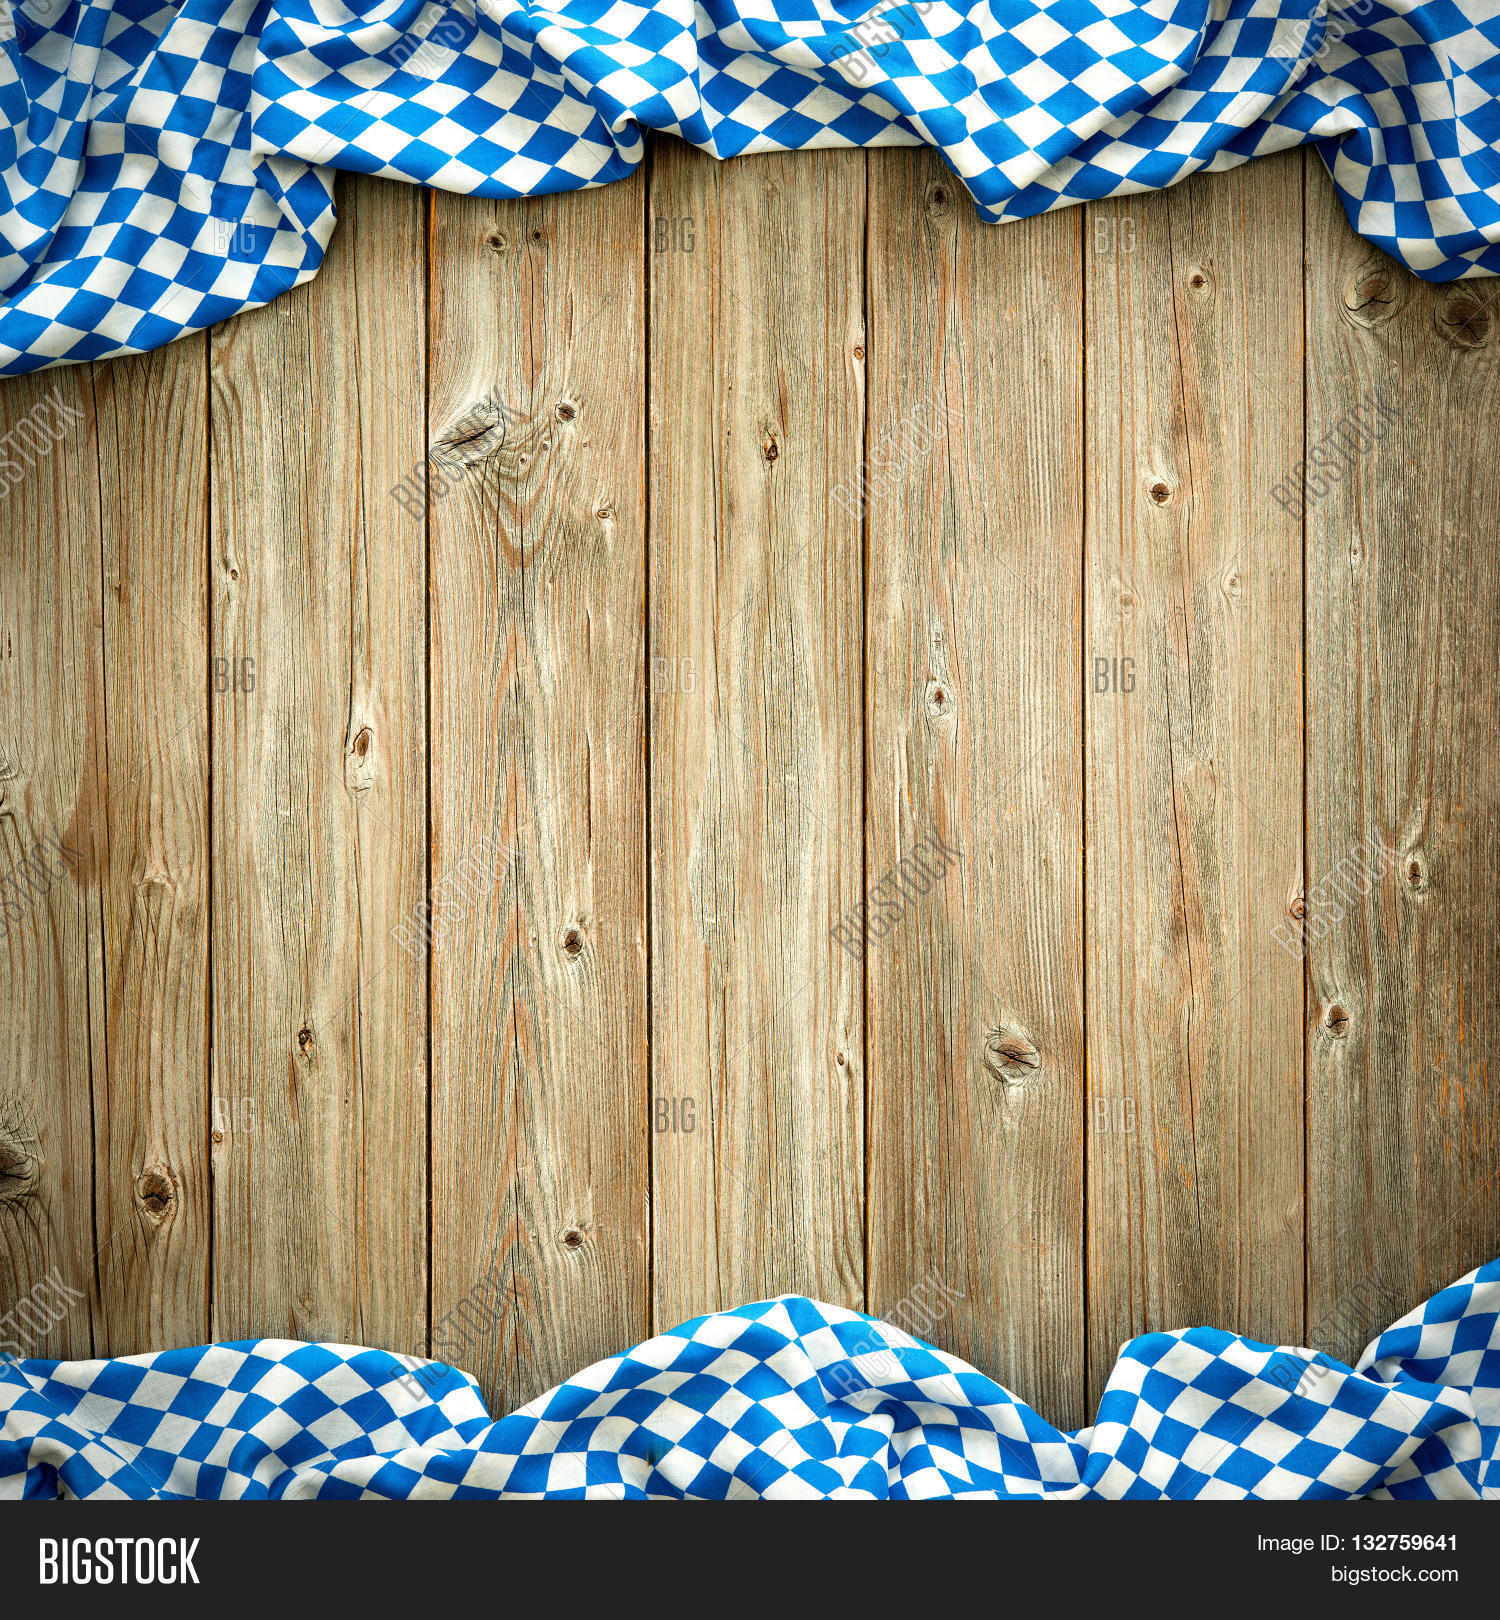 Rustic Background Image Photo Trial Bigstock